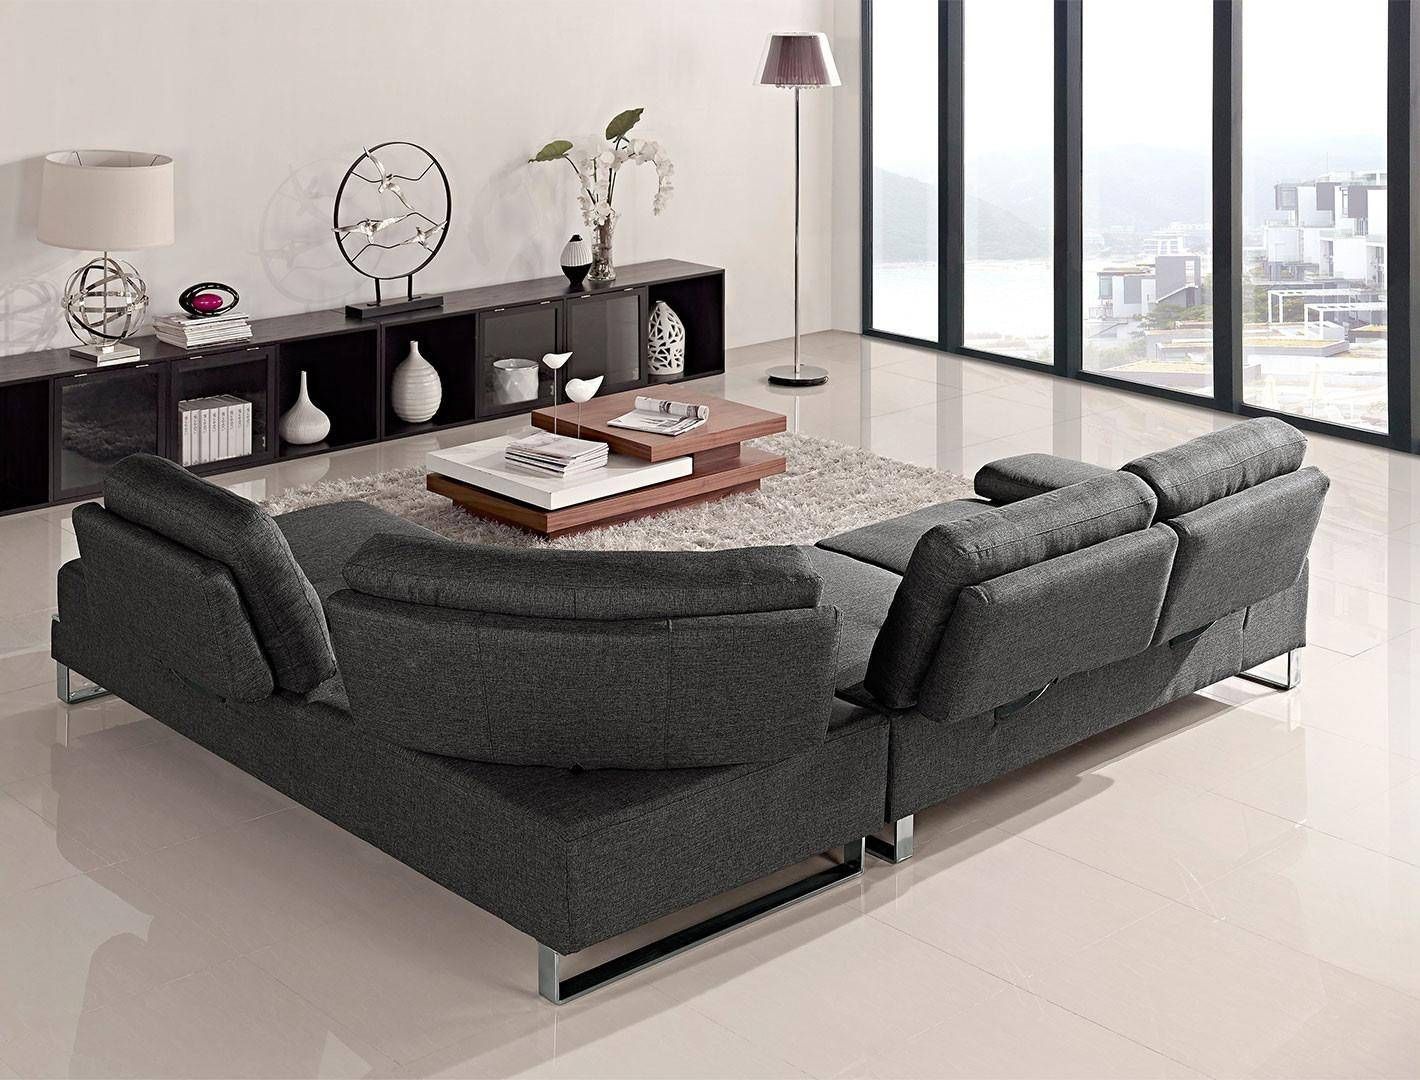 At Home Usa Verona Grey Fabric Ultra Modern Sectional Sofa Throughout Sectional Sofas In Gray (View 14 of 15)